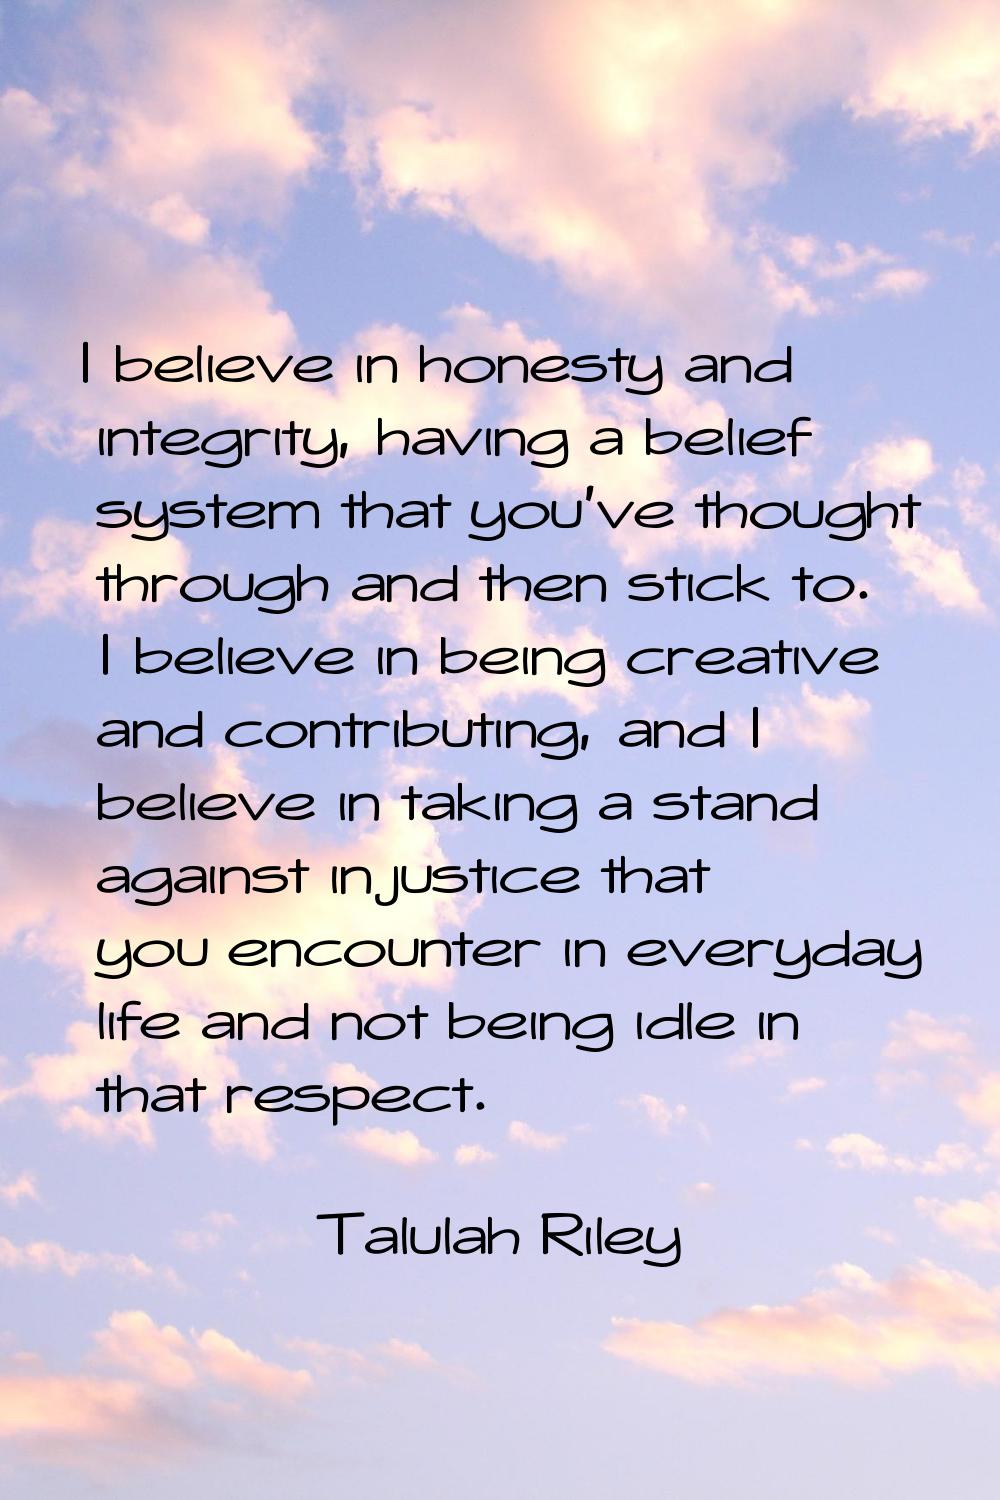 I believe in honesty and integrity, having a belief system that you've thought through and then sti